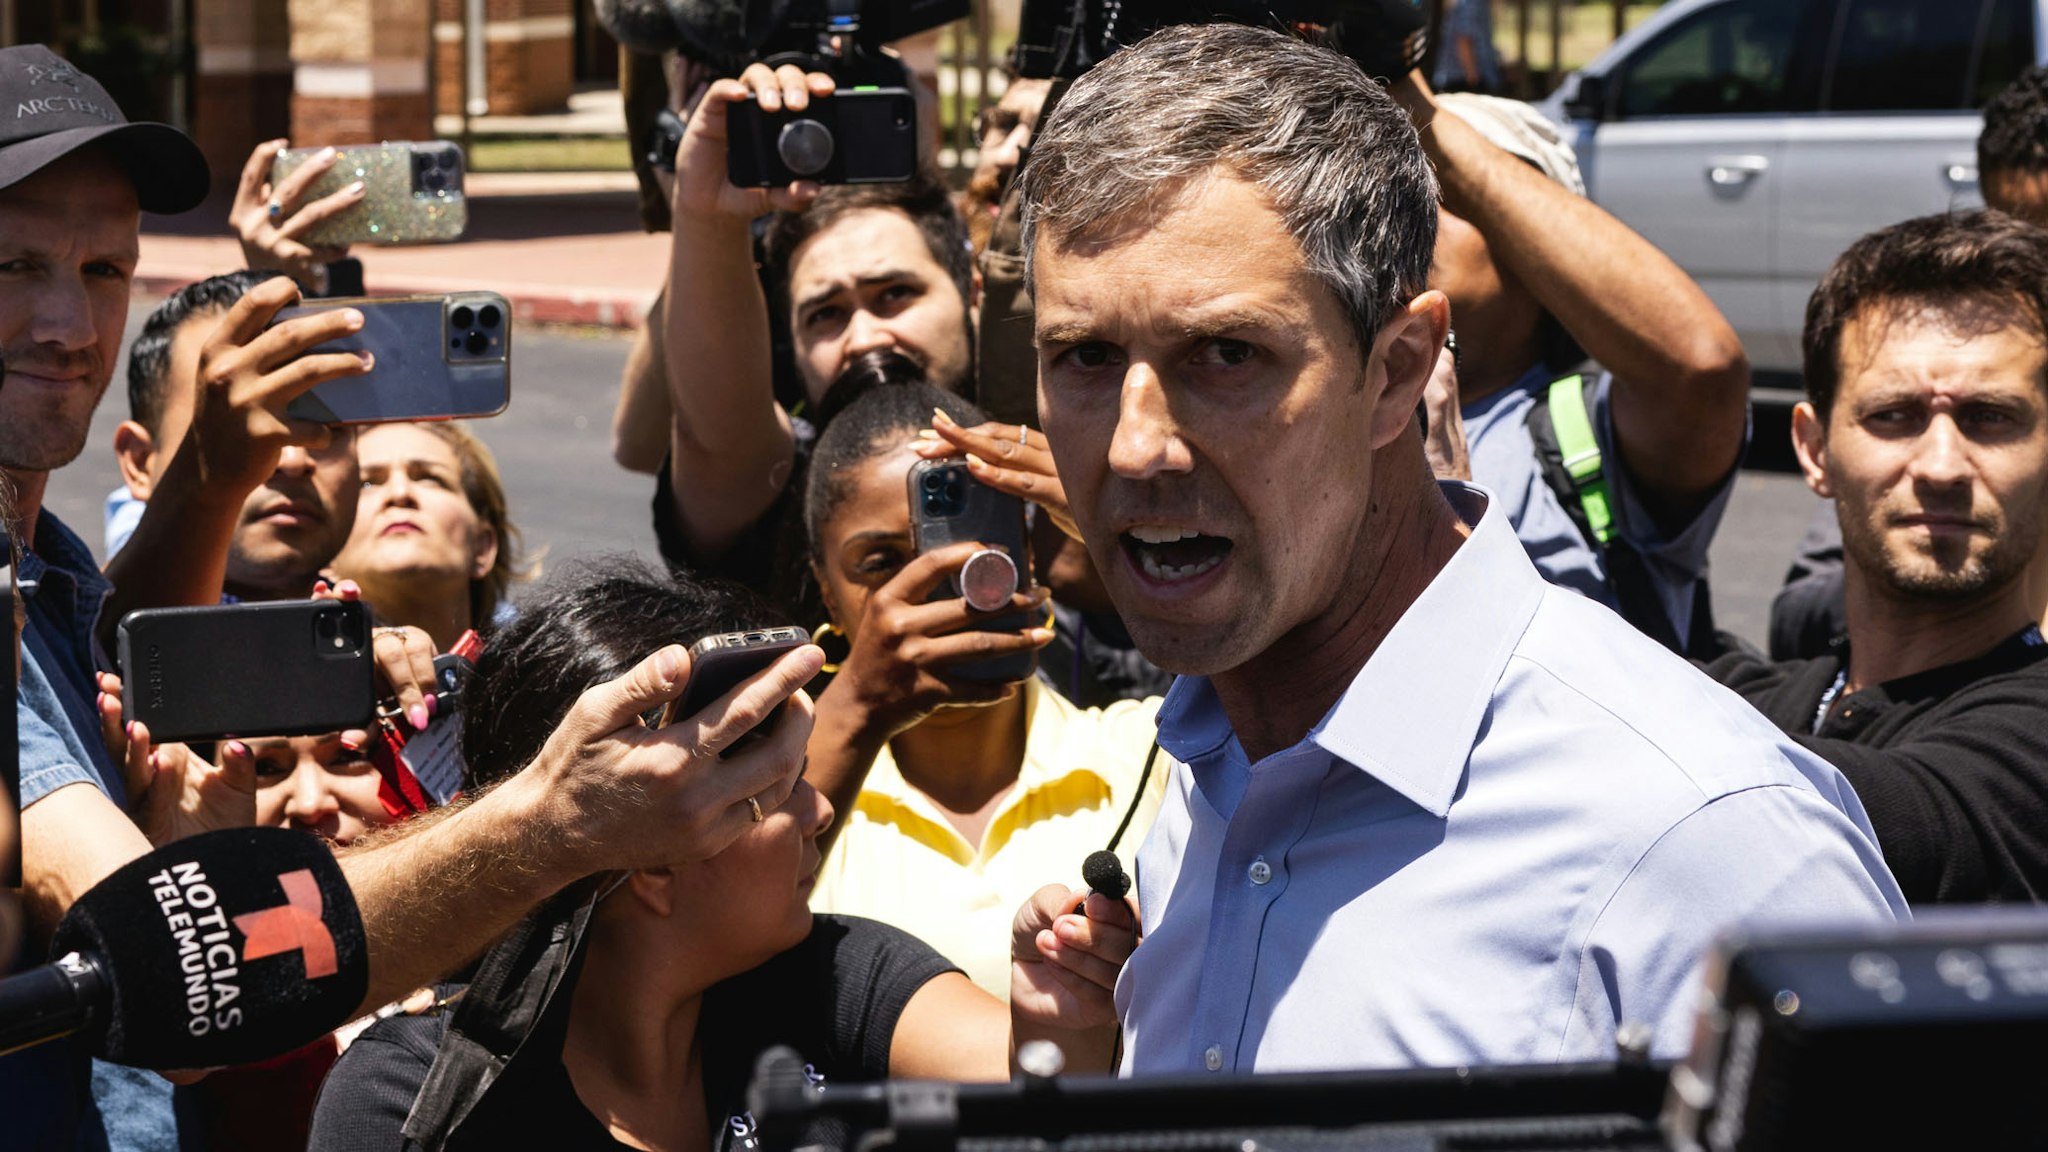 UVALDE, TX - MAY 25: Democratic gubernatorial candidate Beto O'Rourke speaks to the media after interrupting a press conference held by Texas Gov. Greg Abbott on May 25, 2022 in Uvalde, Texas. 21 people were killed, including 19 children, during a mass shooting on May 24 at Robb Elementary School. The shooter, identified as 18 year old Salvador Ramos, was reportedly killed by law enforcement.